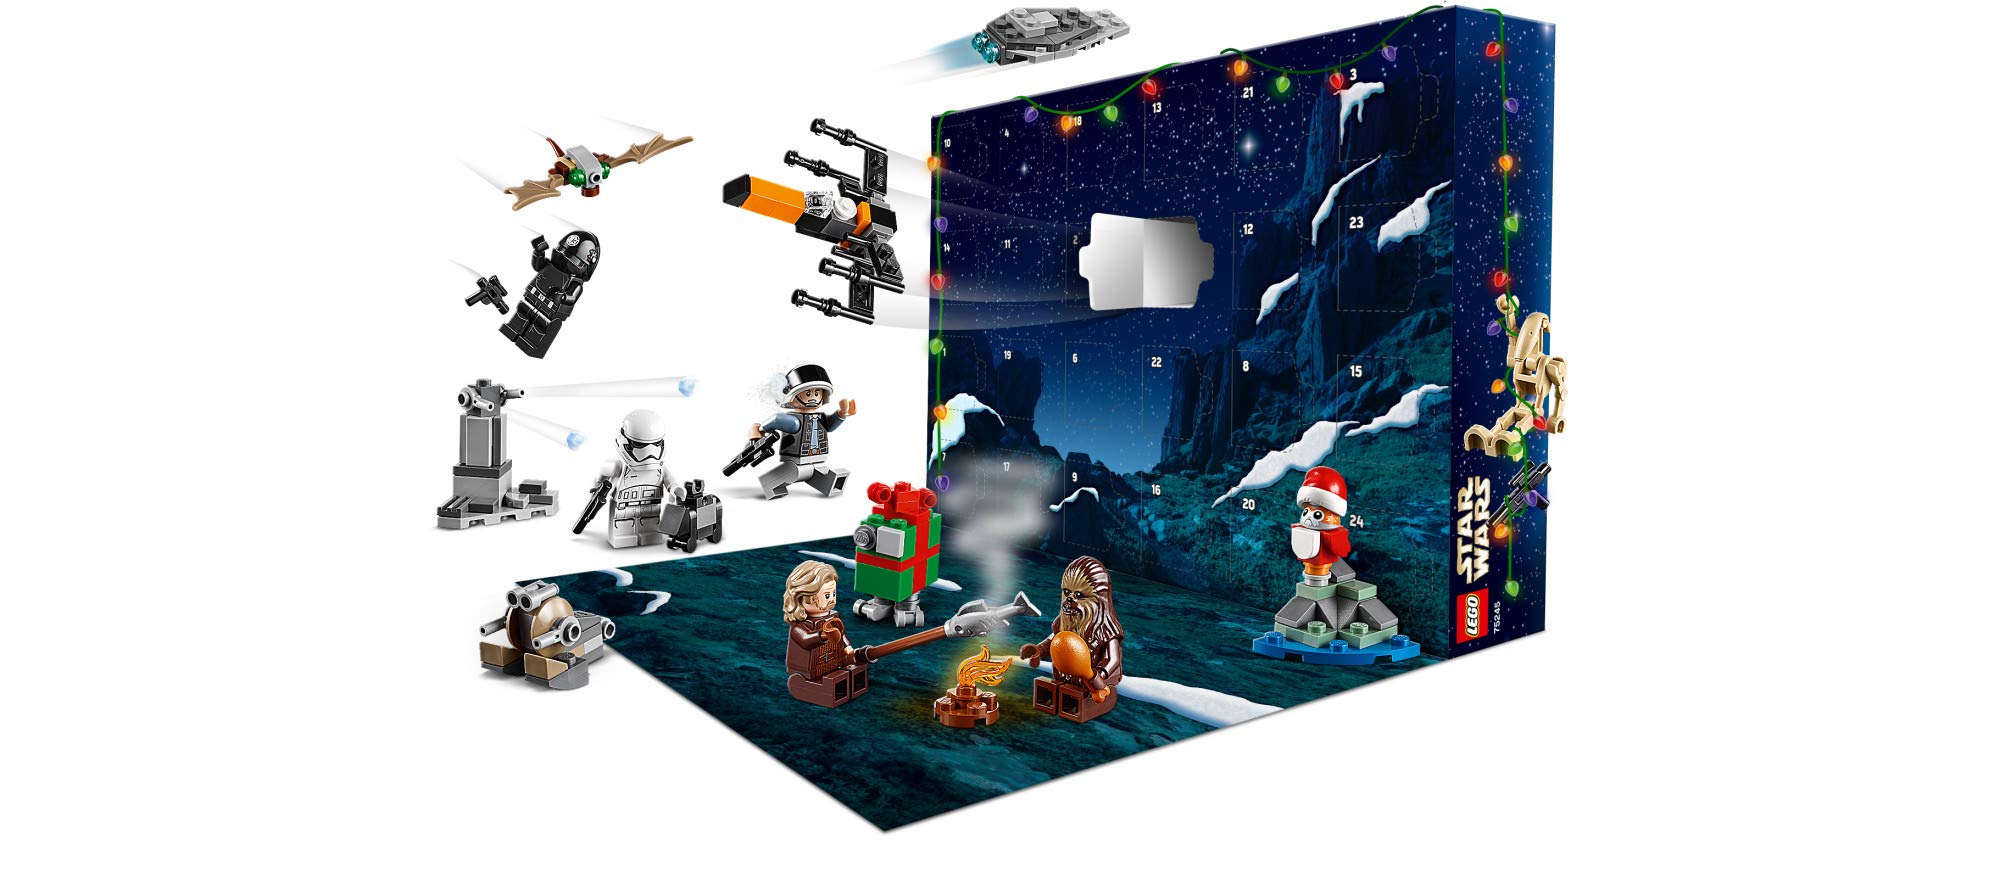 LEGO Star Wars 2019 Advent Calendar 75245 Set Building Kit with Star Wars Minifigure Characters (280 Pieces) (Discontinued by Manufacturer)